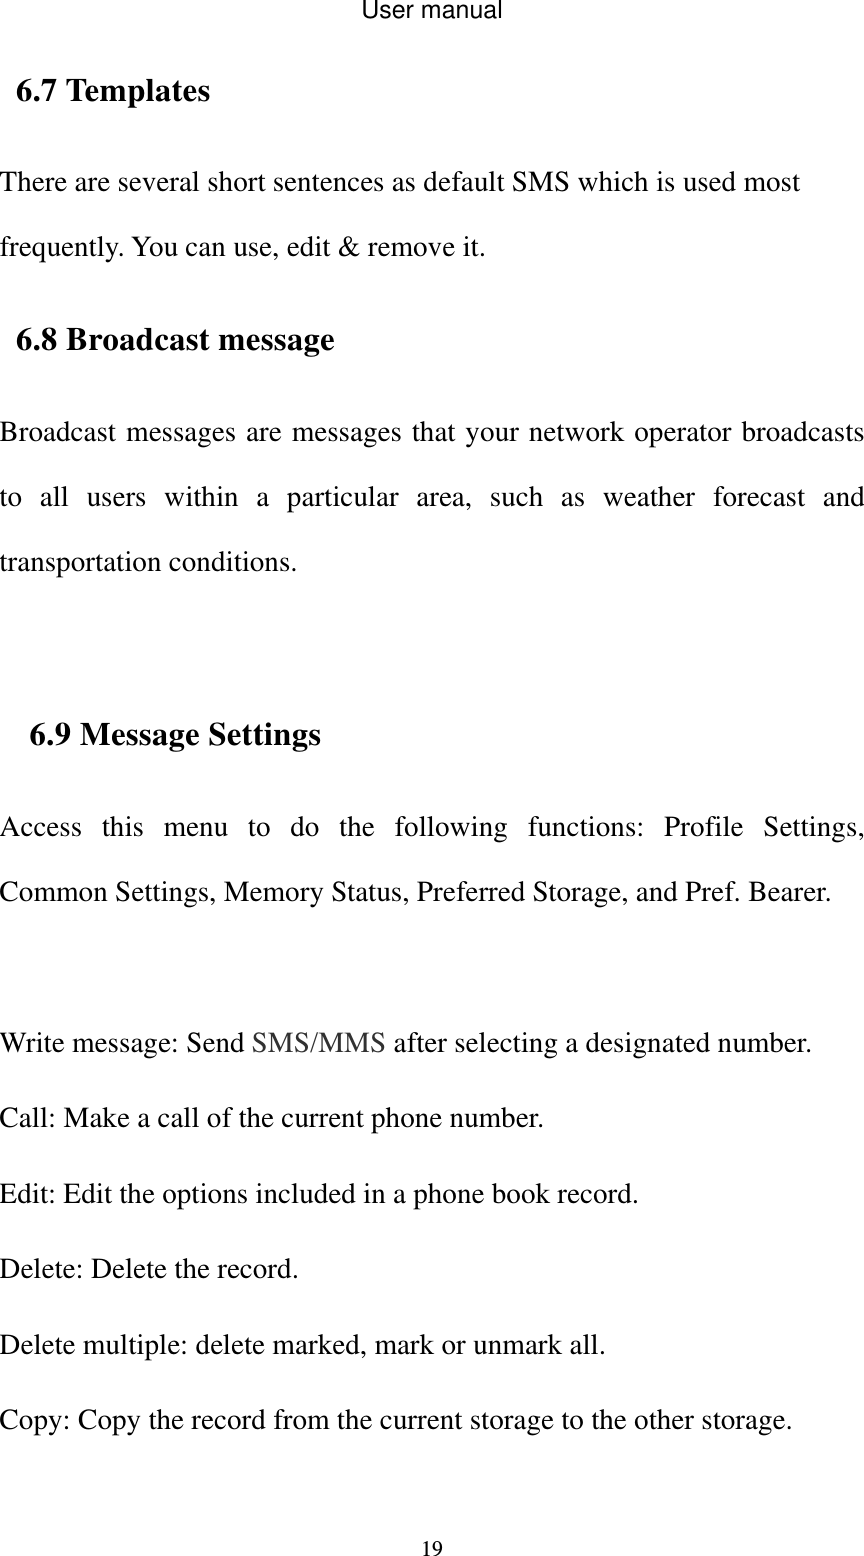 User manual  196.7 Templates     There are several short sentences as default SMS which is used most frequently. You can use, edit &amp; remove it. 6.8 Broadcast message Broadcast messages are messages that your network operator broadcasts to all users within a particular area, such as weather forecast and transportation conditions.  6.9 Message Settings Access this menu to do the following functions: Profile Settings, Common Settings, Memory Status, Preferred Storage, and Pref. Bearer.  Write message: Send SMS/MMS after selecting a designated number. Call: Make a call of the current phone number. Edit: Edit the options included in a phone book record. Delete: Delete the record. Delete multiple: delete marked, mark or unmark all. Copy: Copy the record from the current storage to the other storage. 